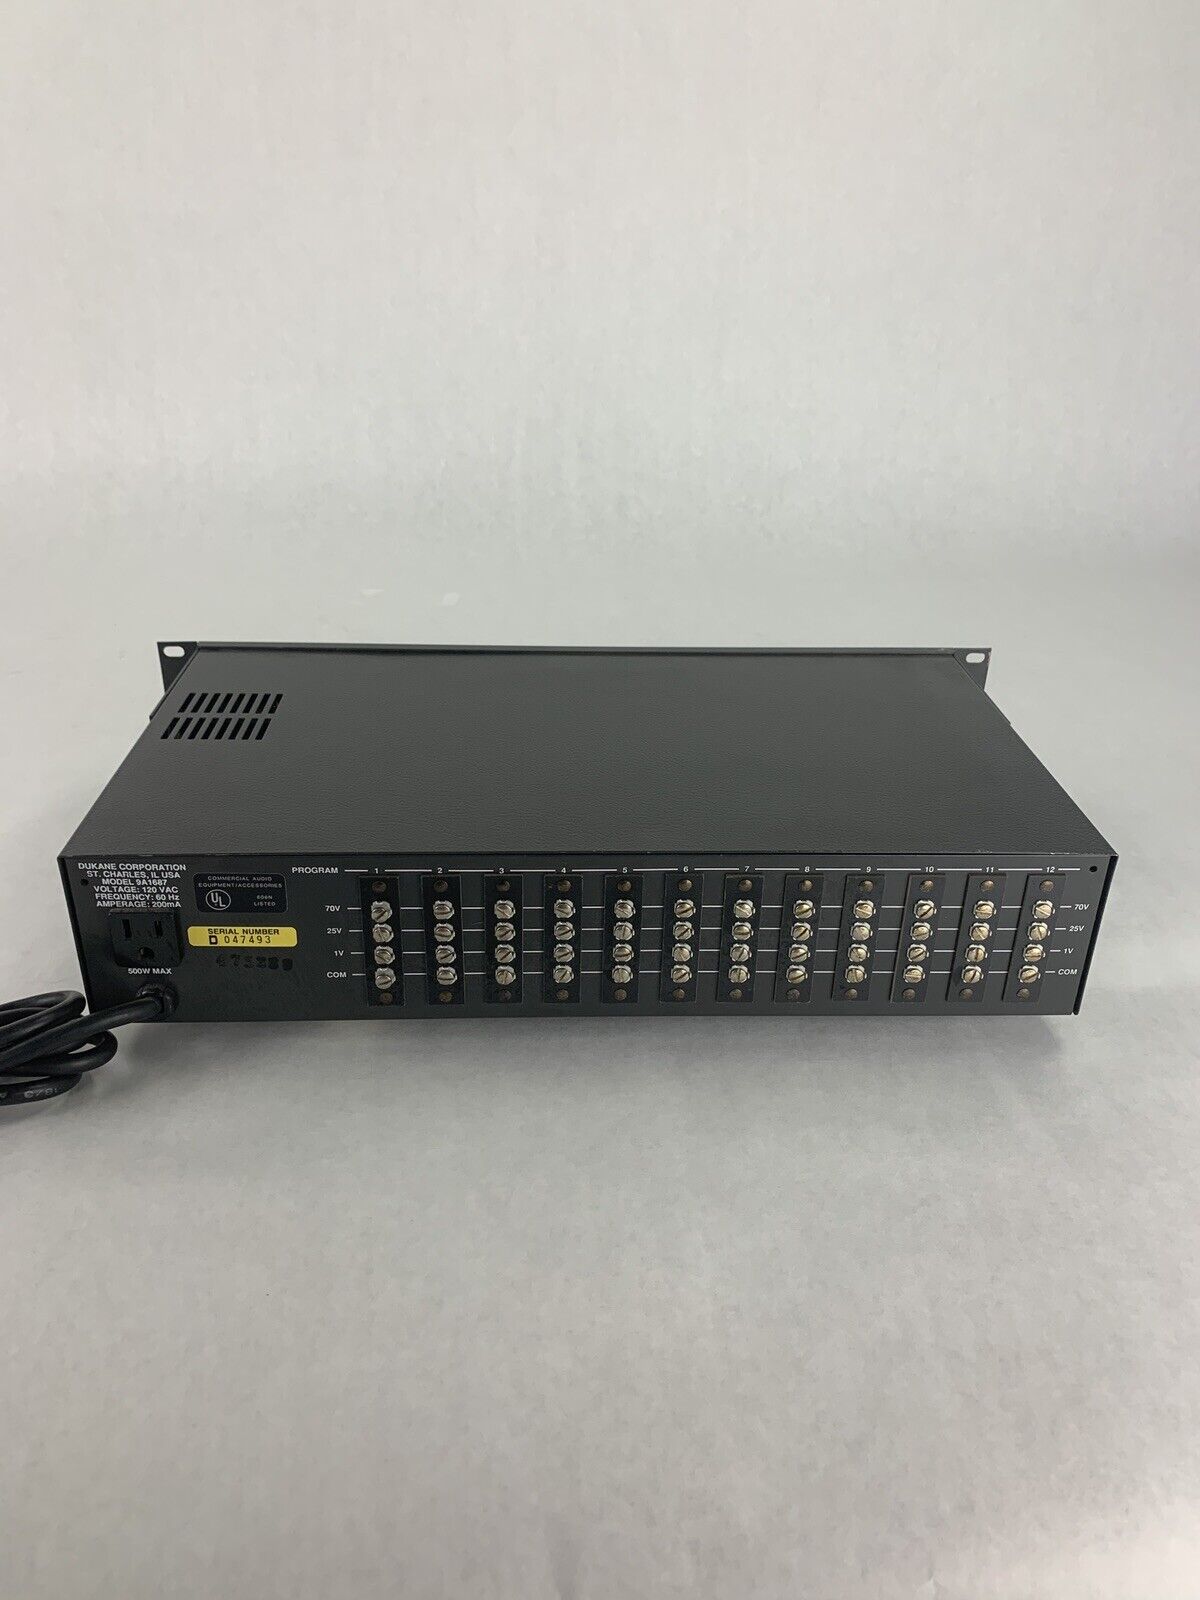 Dukane 9A1687 Amplified Panel Power Tested